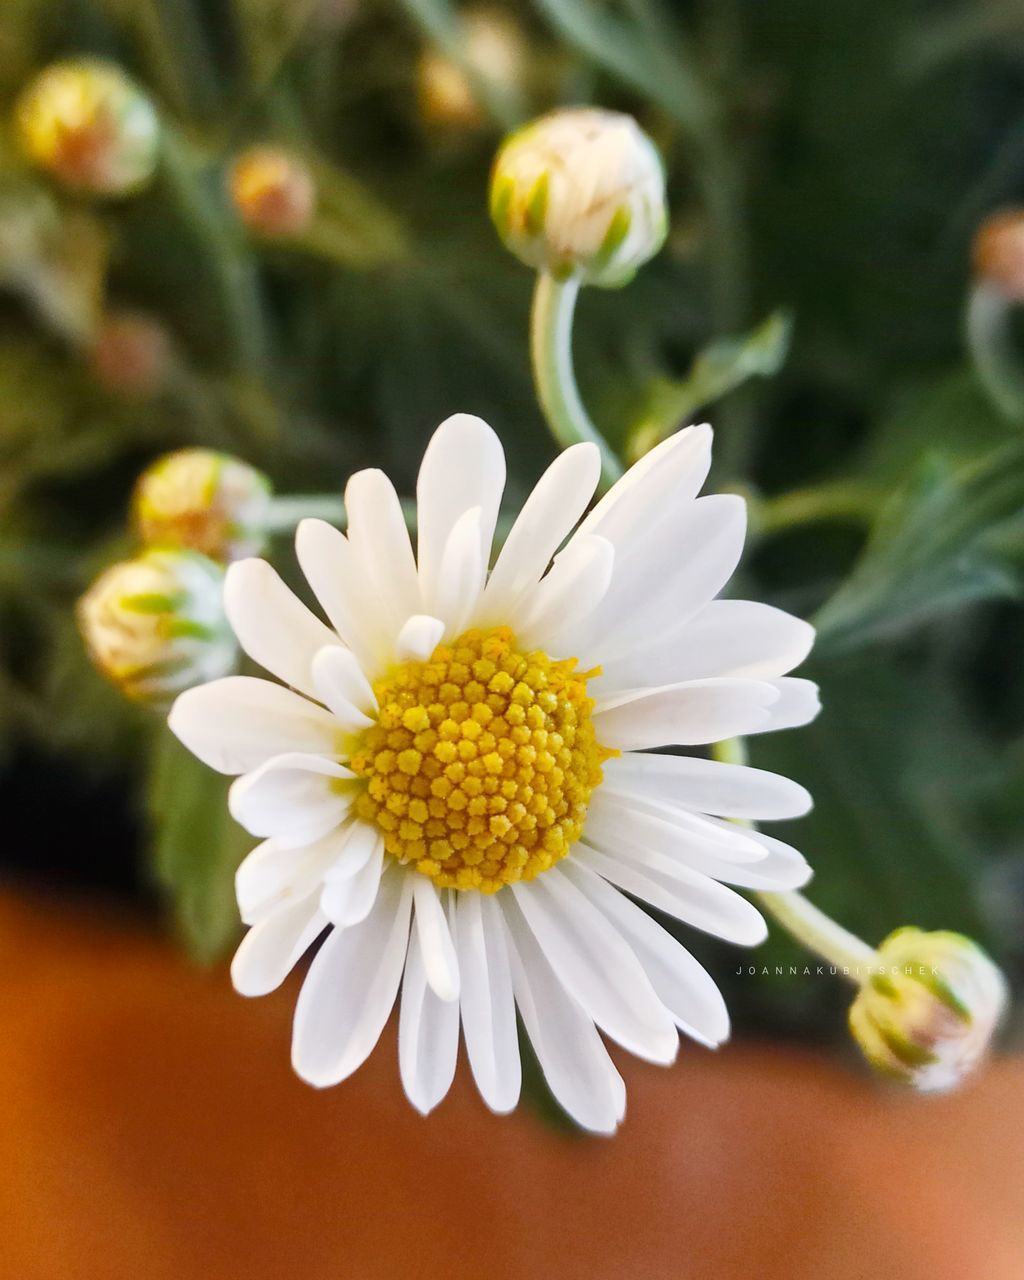 CLOSE-UP OF WHITE DAISIES